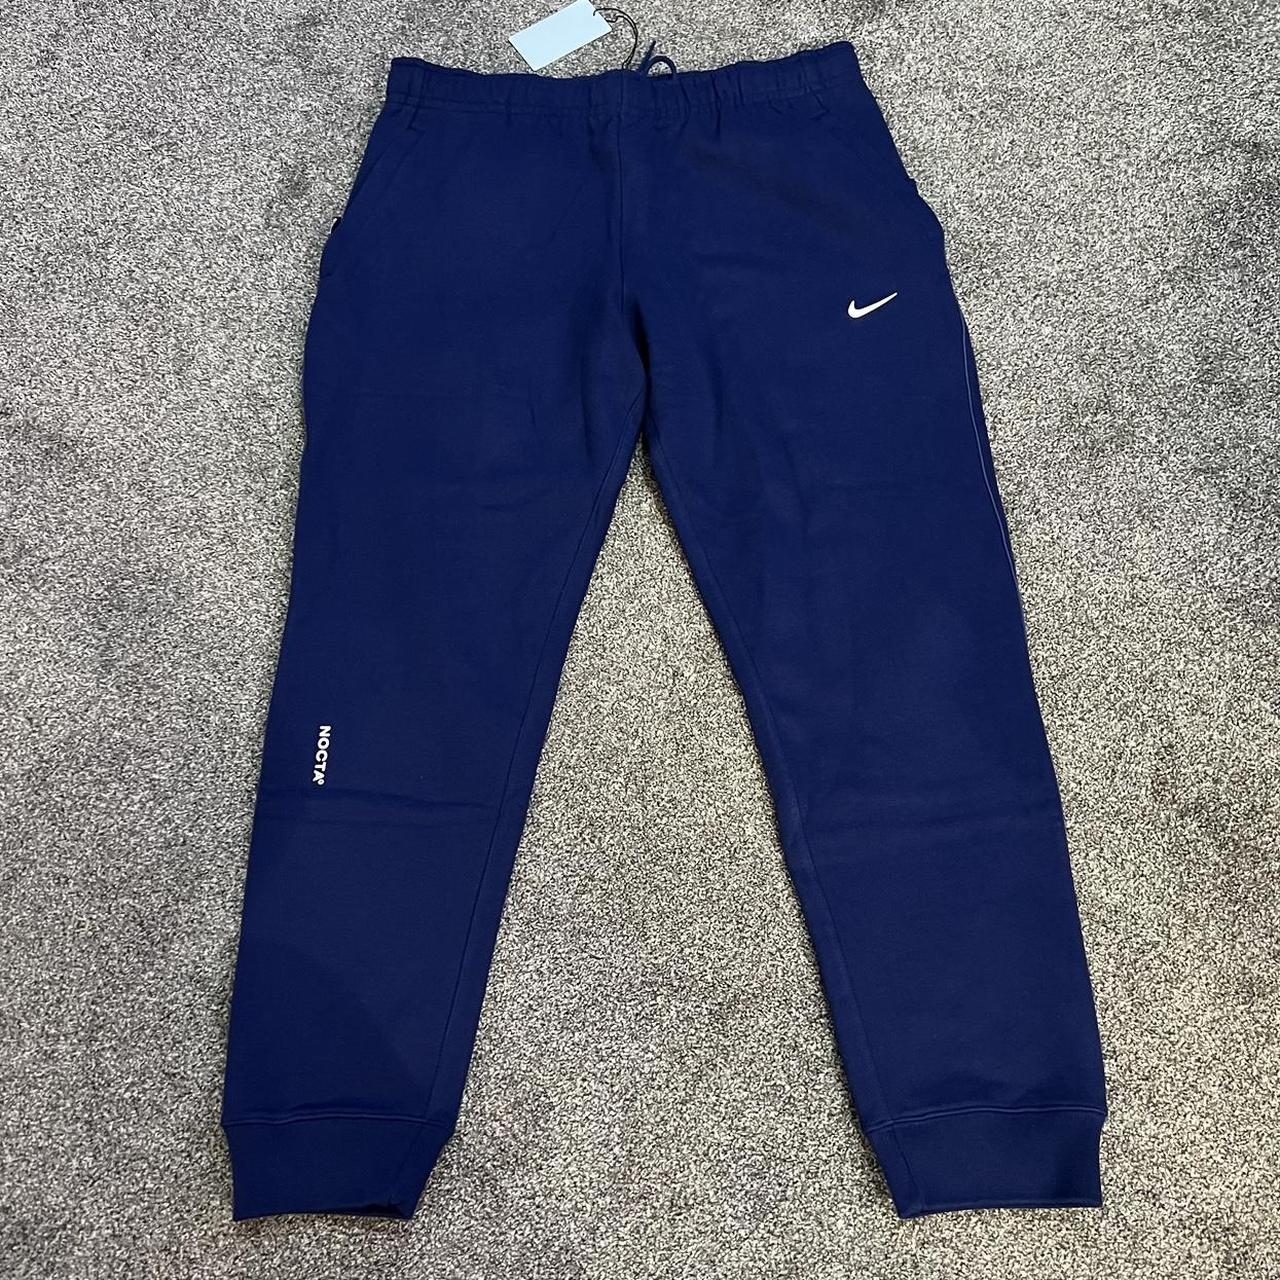 nocta joggers - never worn, brand new - bought for... - Depop